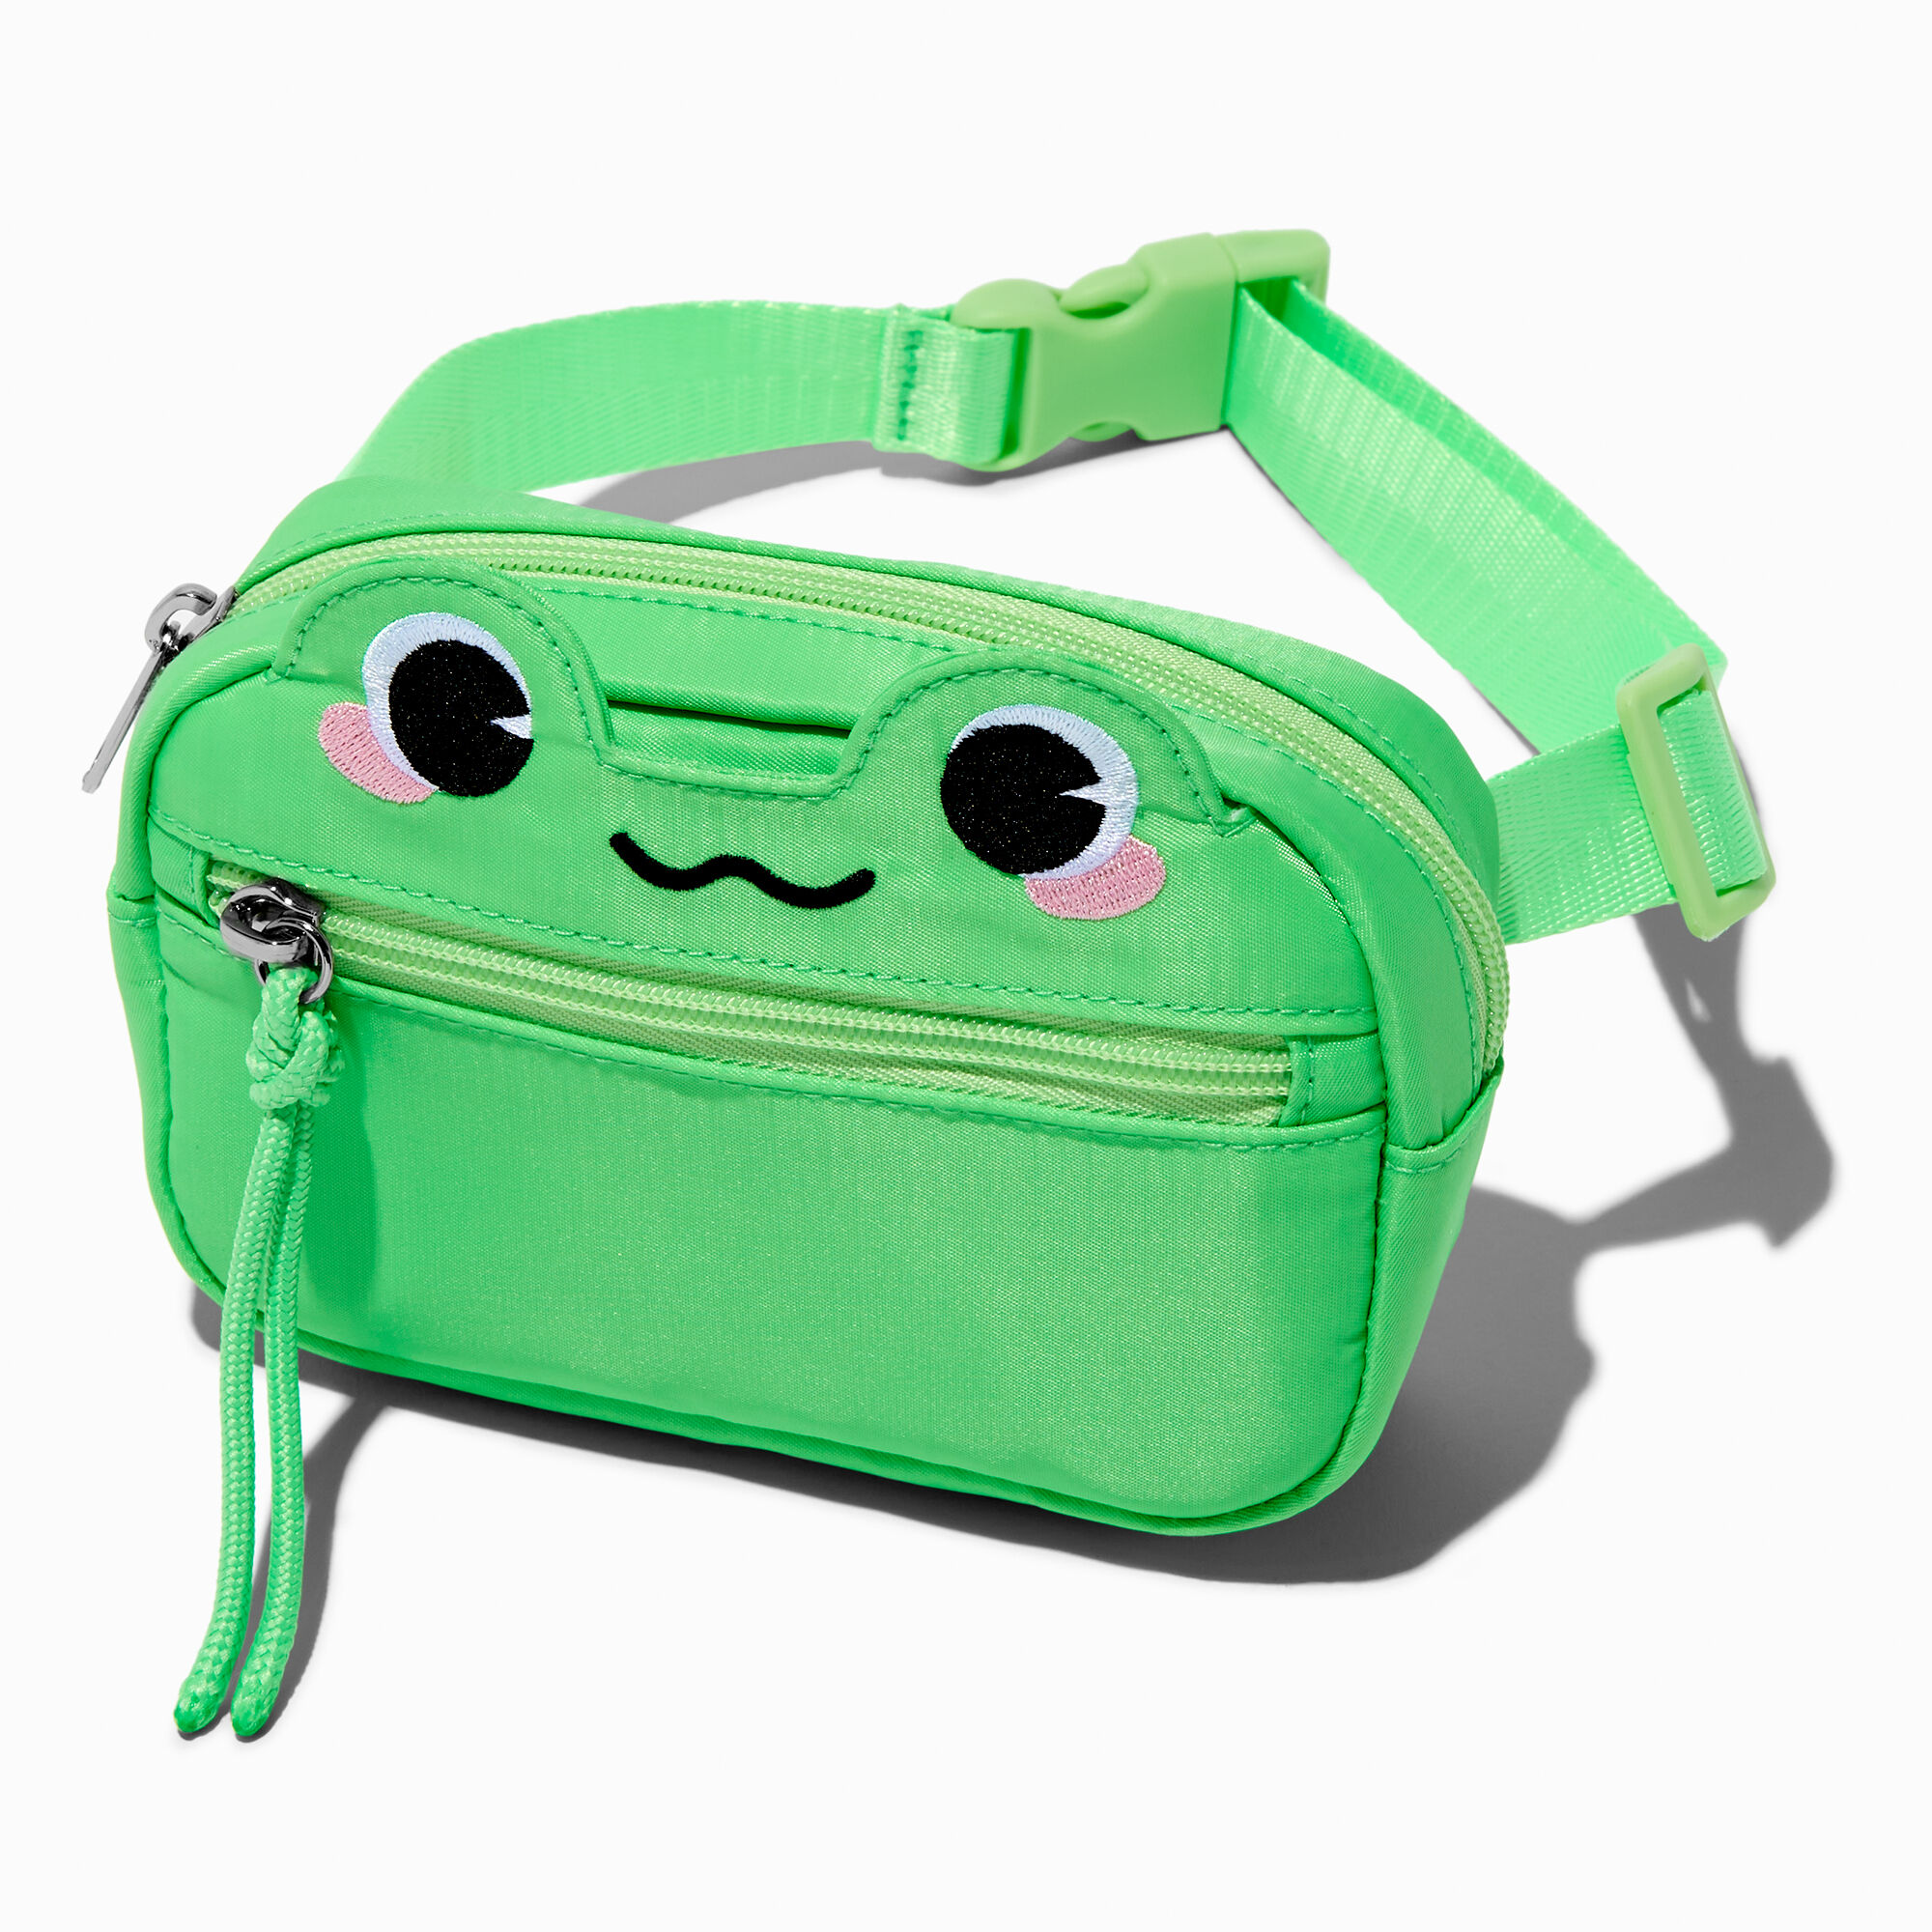 View Claires Frog Bum Bag Green information